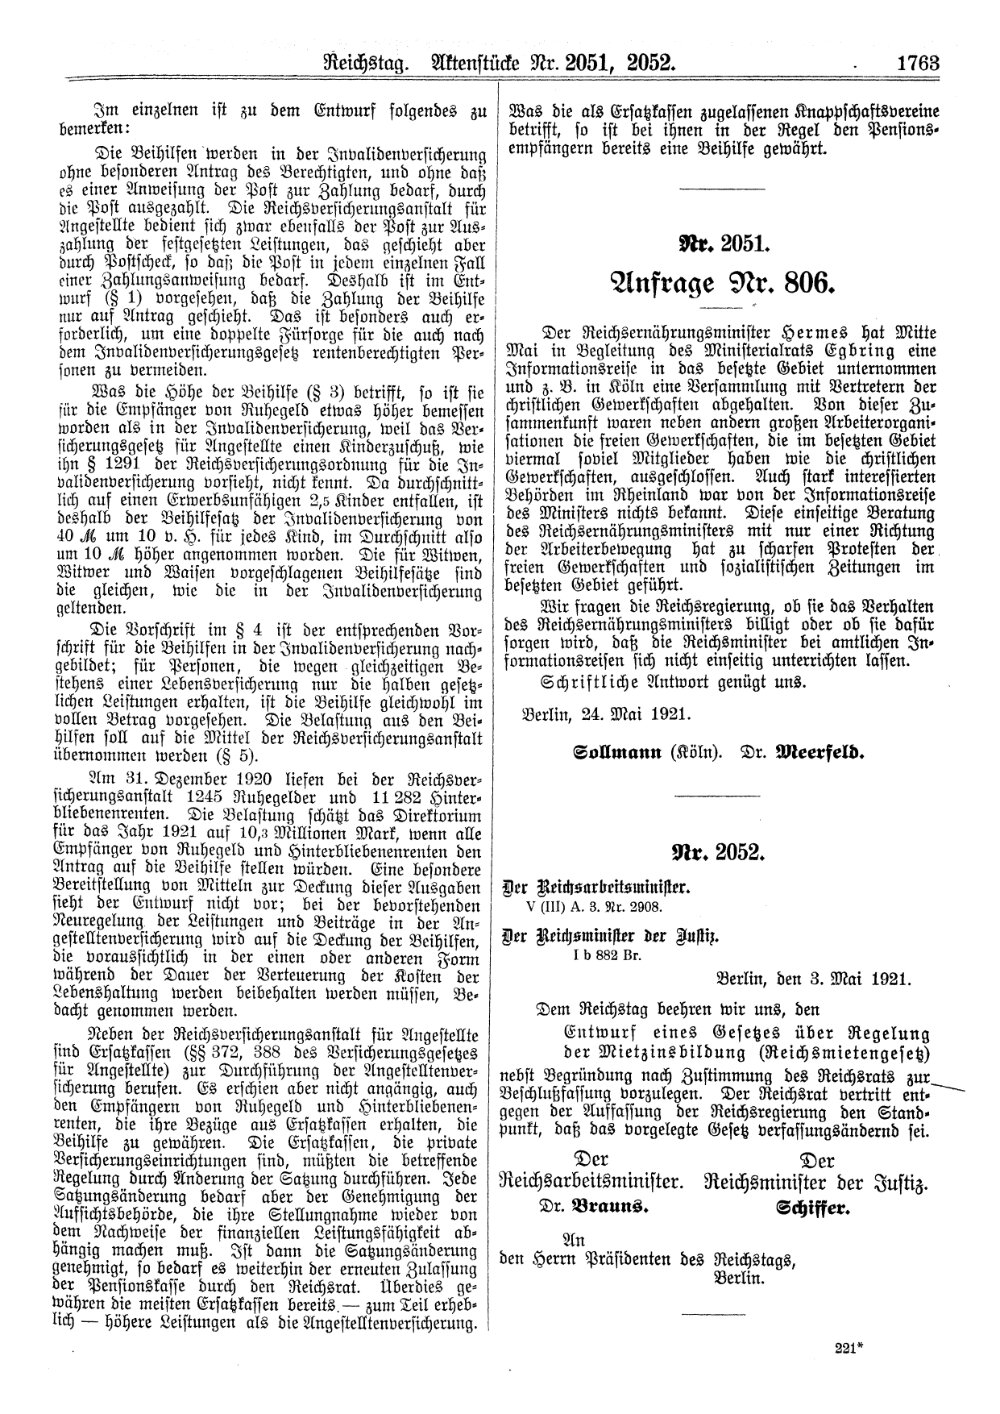 Scan of page 1763